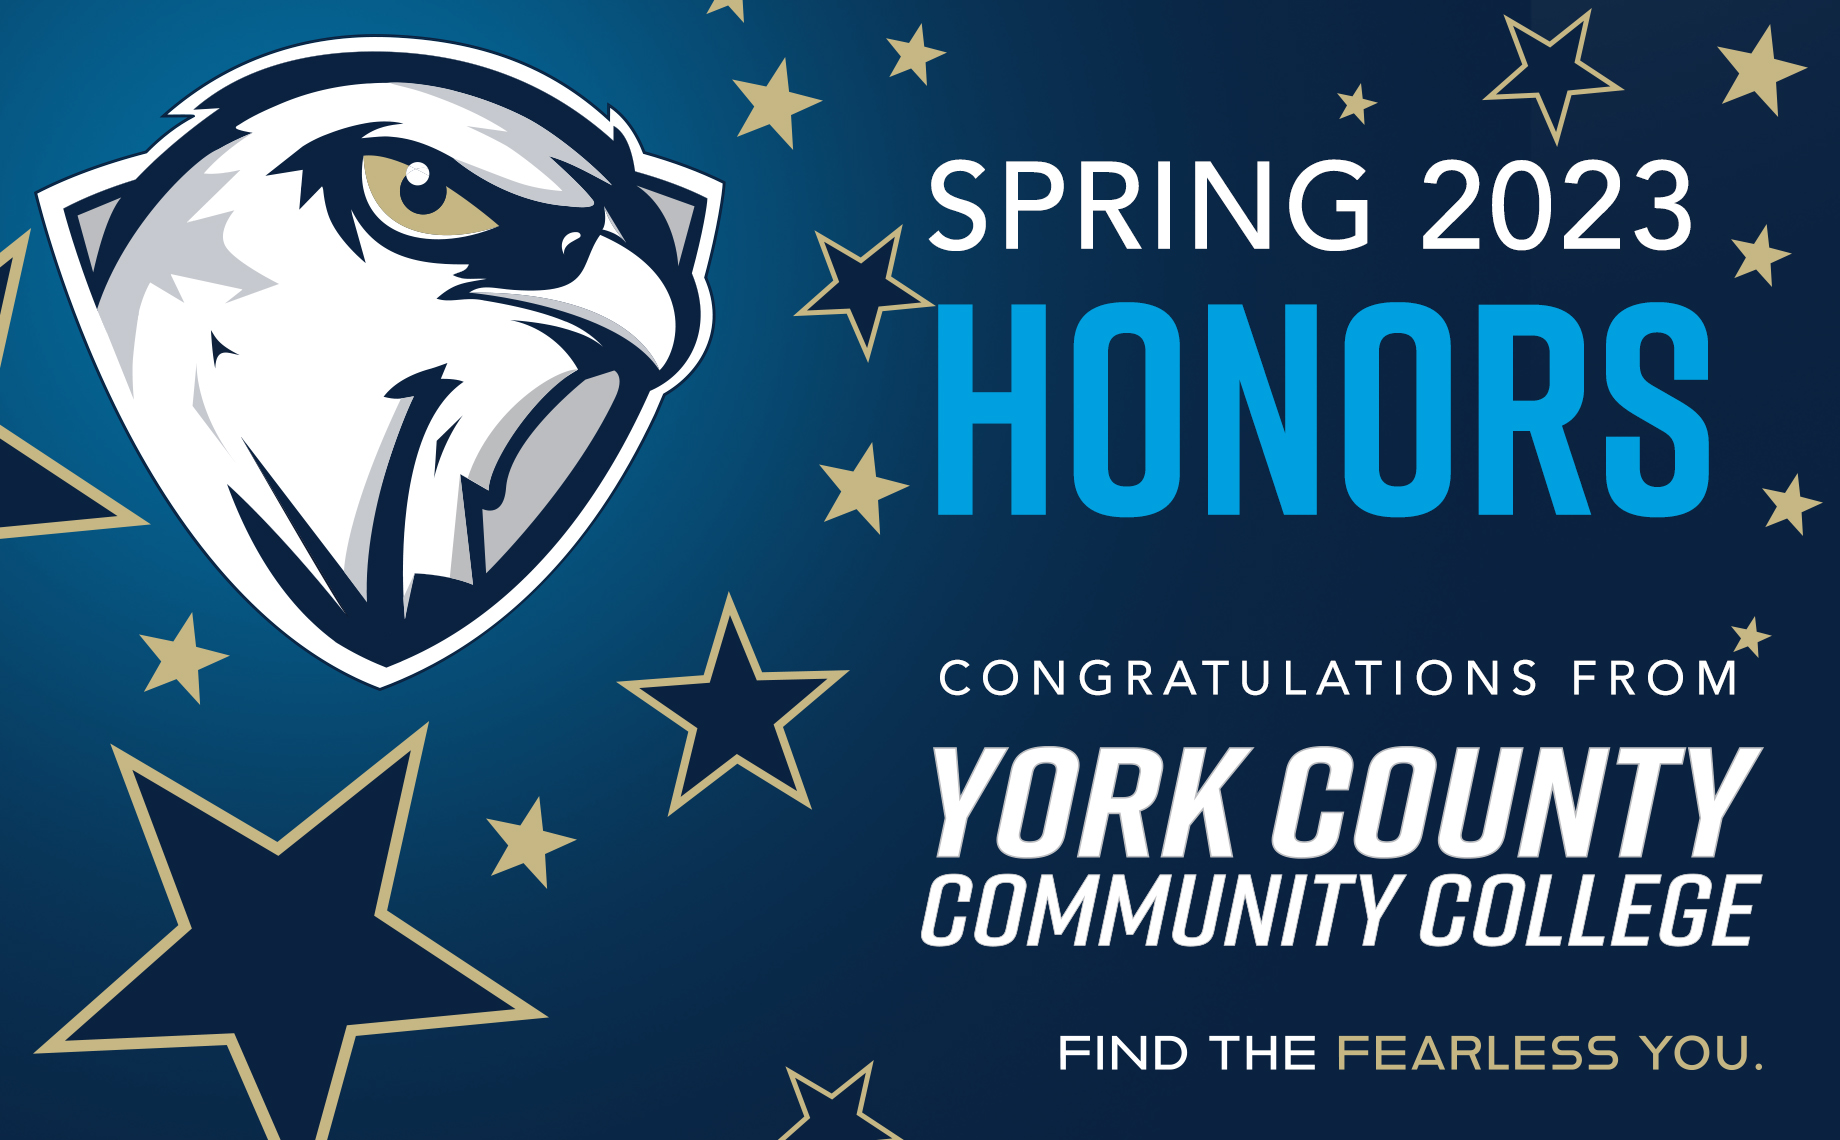 YCCC ANNOUNCES SPRING 2023 Honors